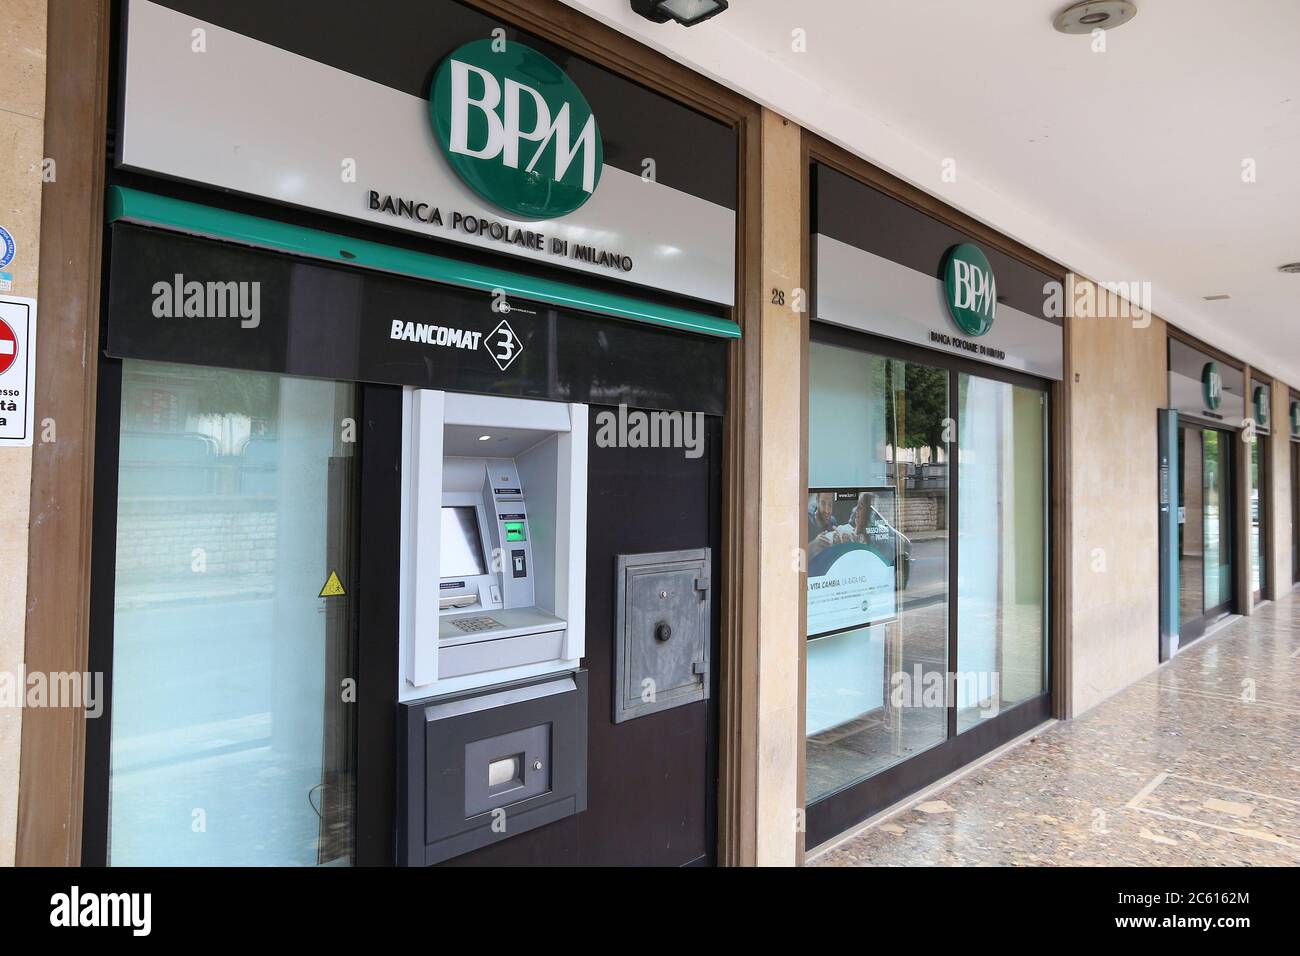 Altamura Italy June 4 2017 Banca Popolare Di Milano Atm And Bank Branch In Italy It Is Owned By Banco Bpm Group Stock Photo Alamy